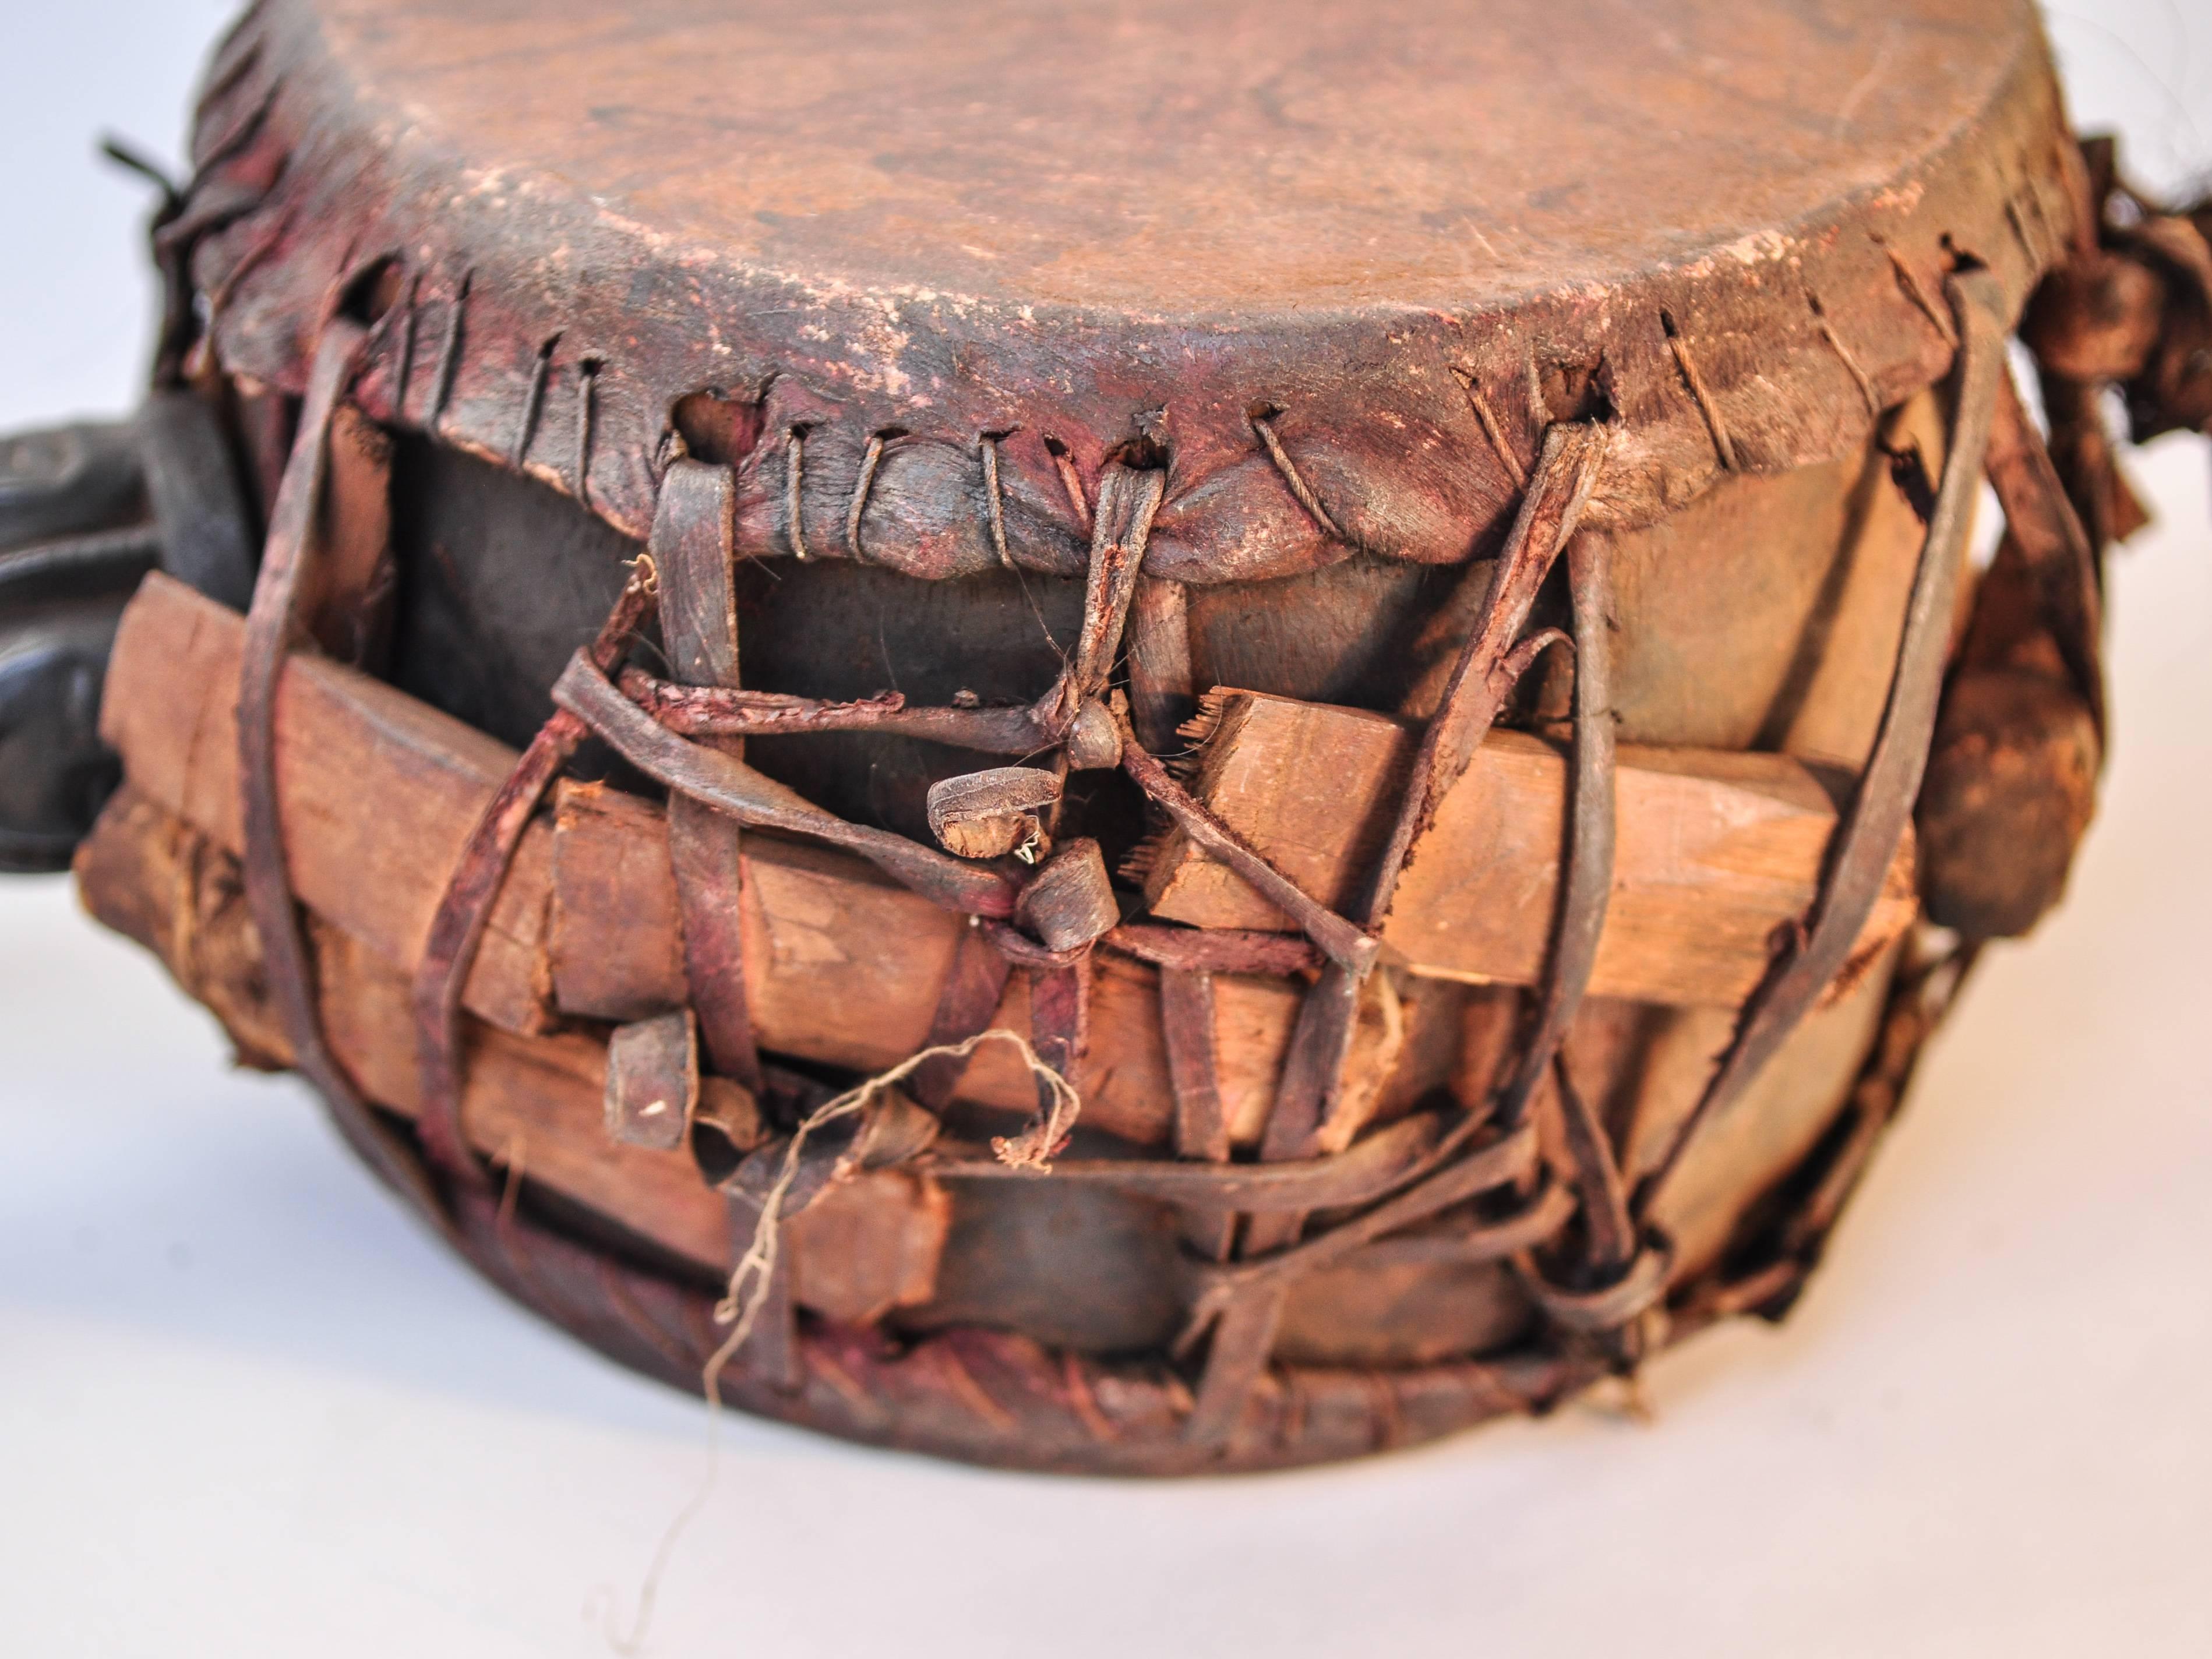 Hide Shaman Drum with Carved Wooden Handle, Nepal Himalaya, Mid-20th Century